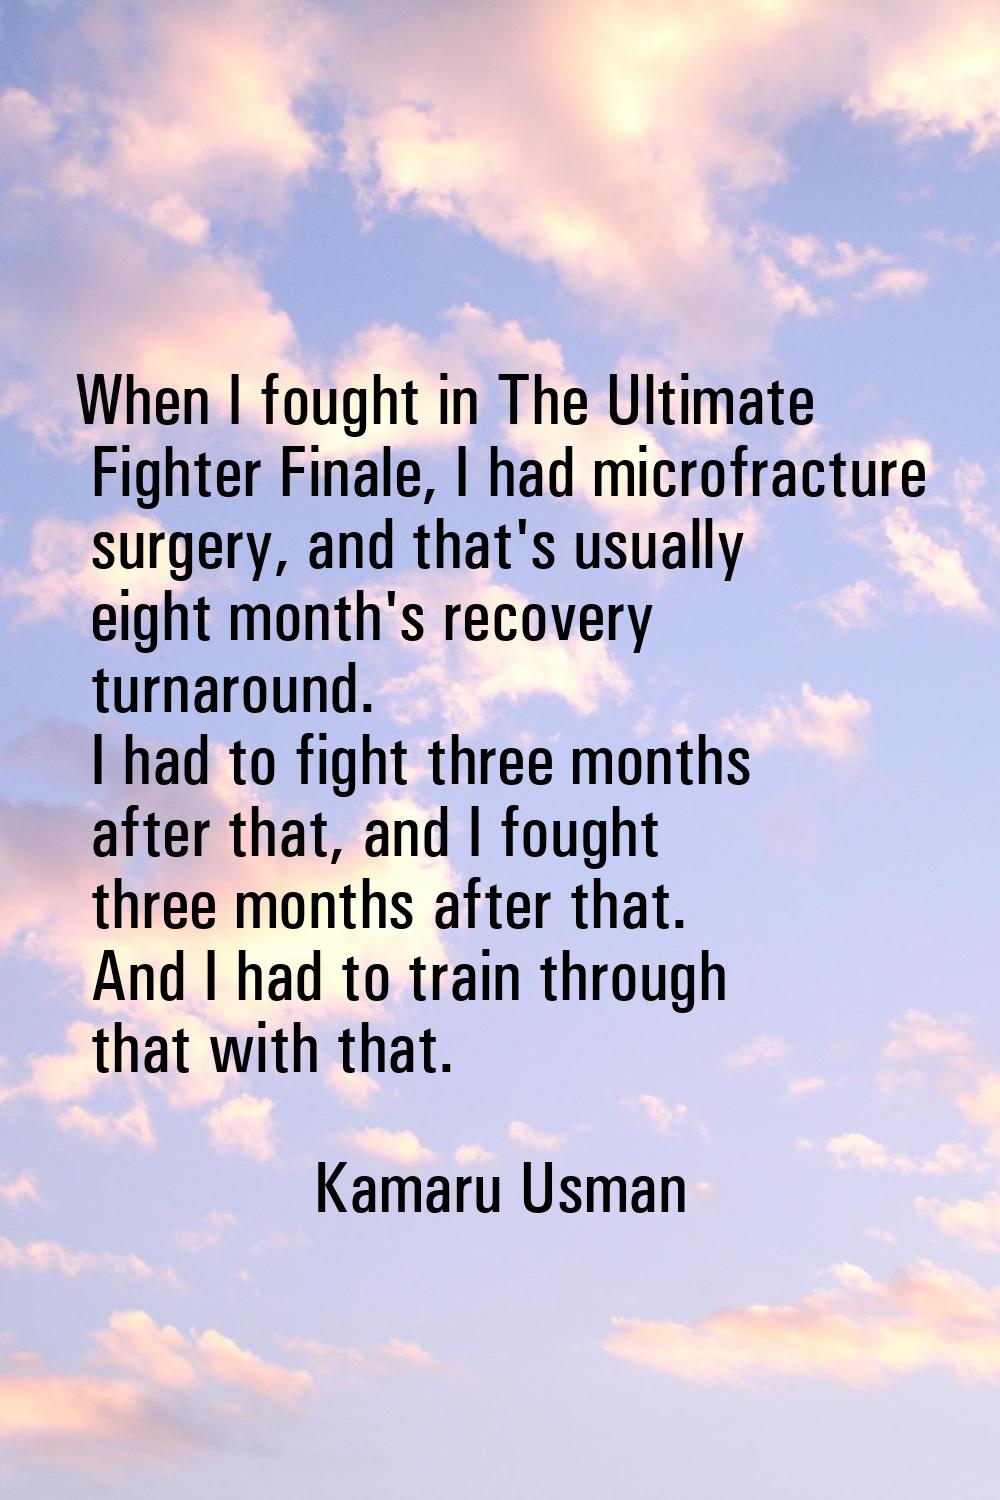 When I fought in The Ultimate Fighter Finale, I had microfracture surgery, and that's usually eight